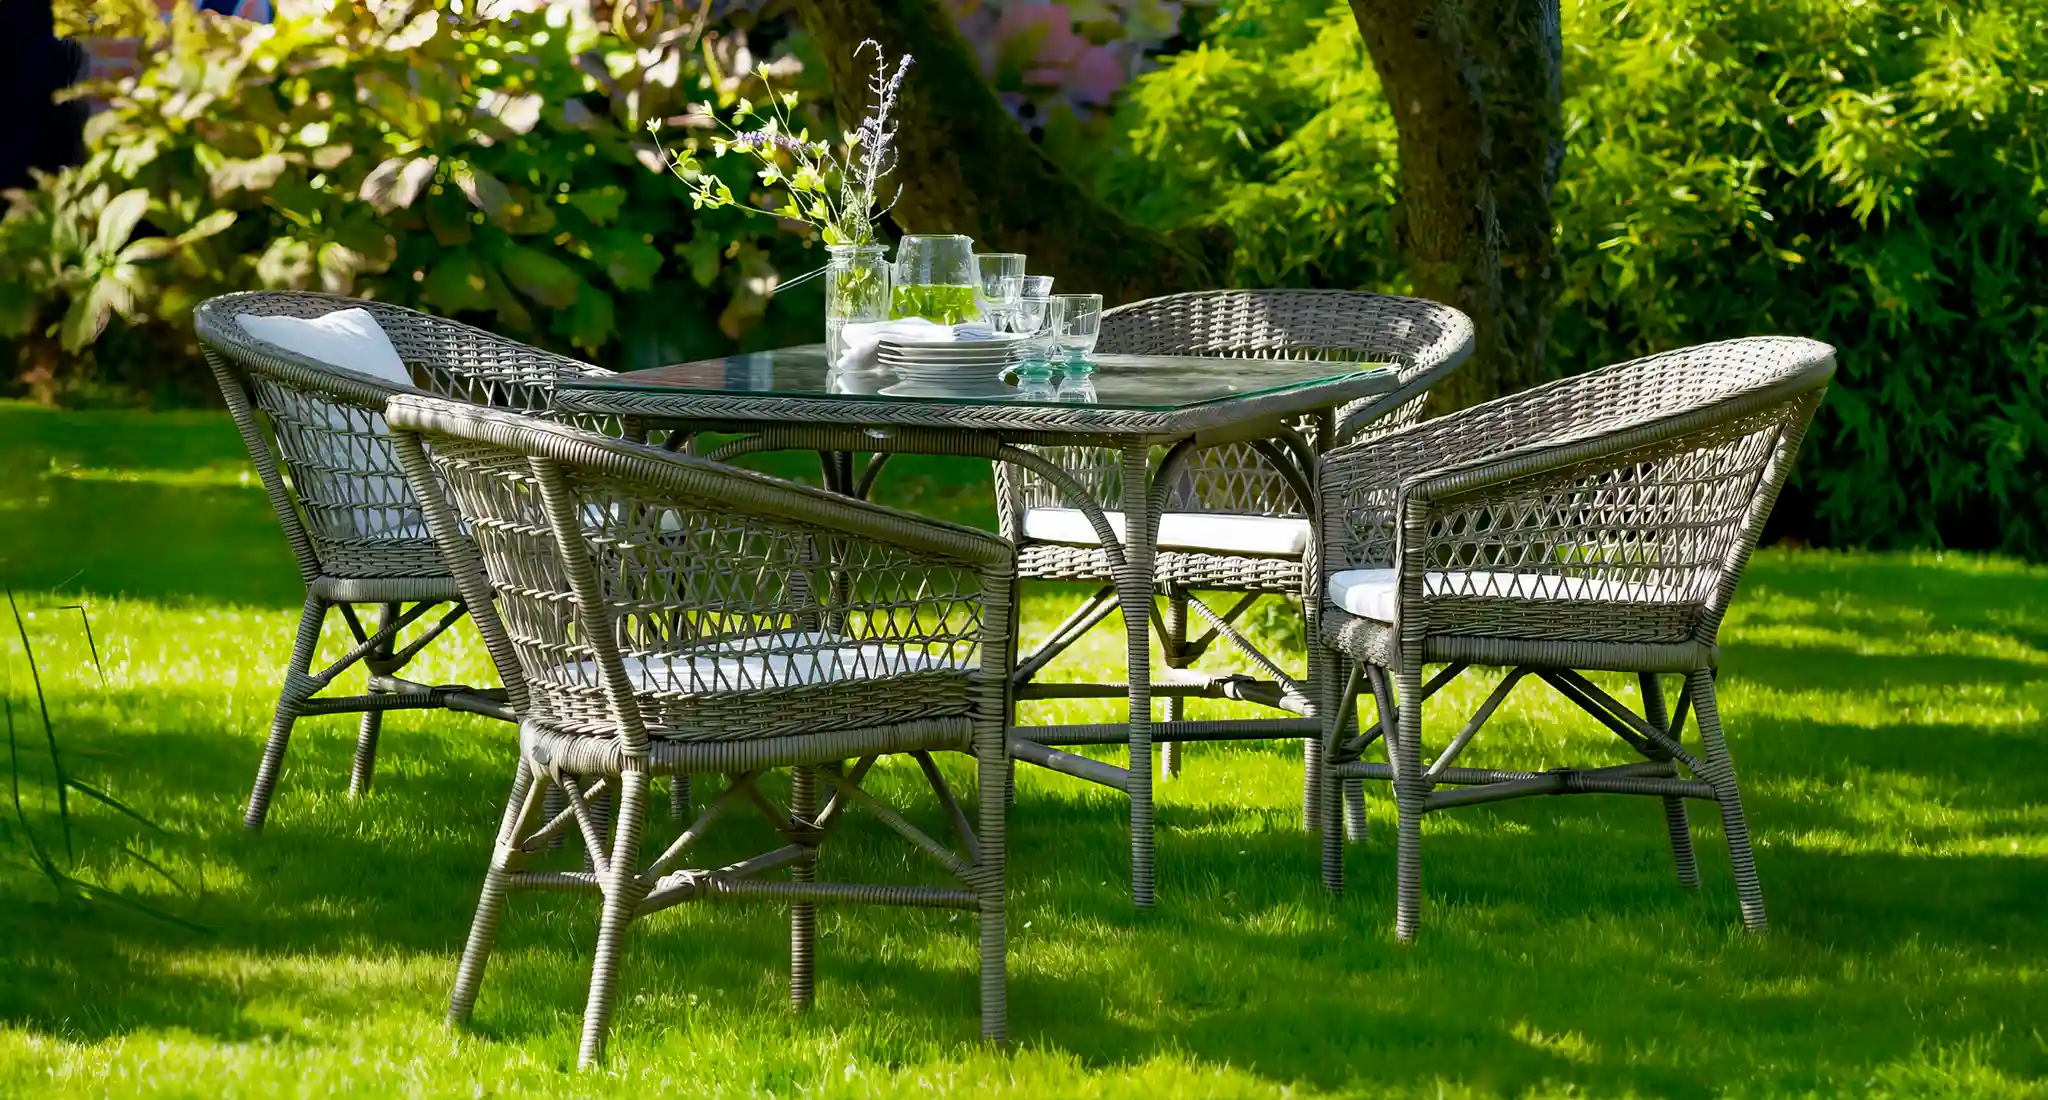 a serene grassy setting features a wicker table and chairs, representing the garden furniture bell plantations in towcester, uk.